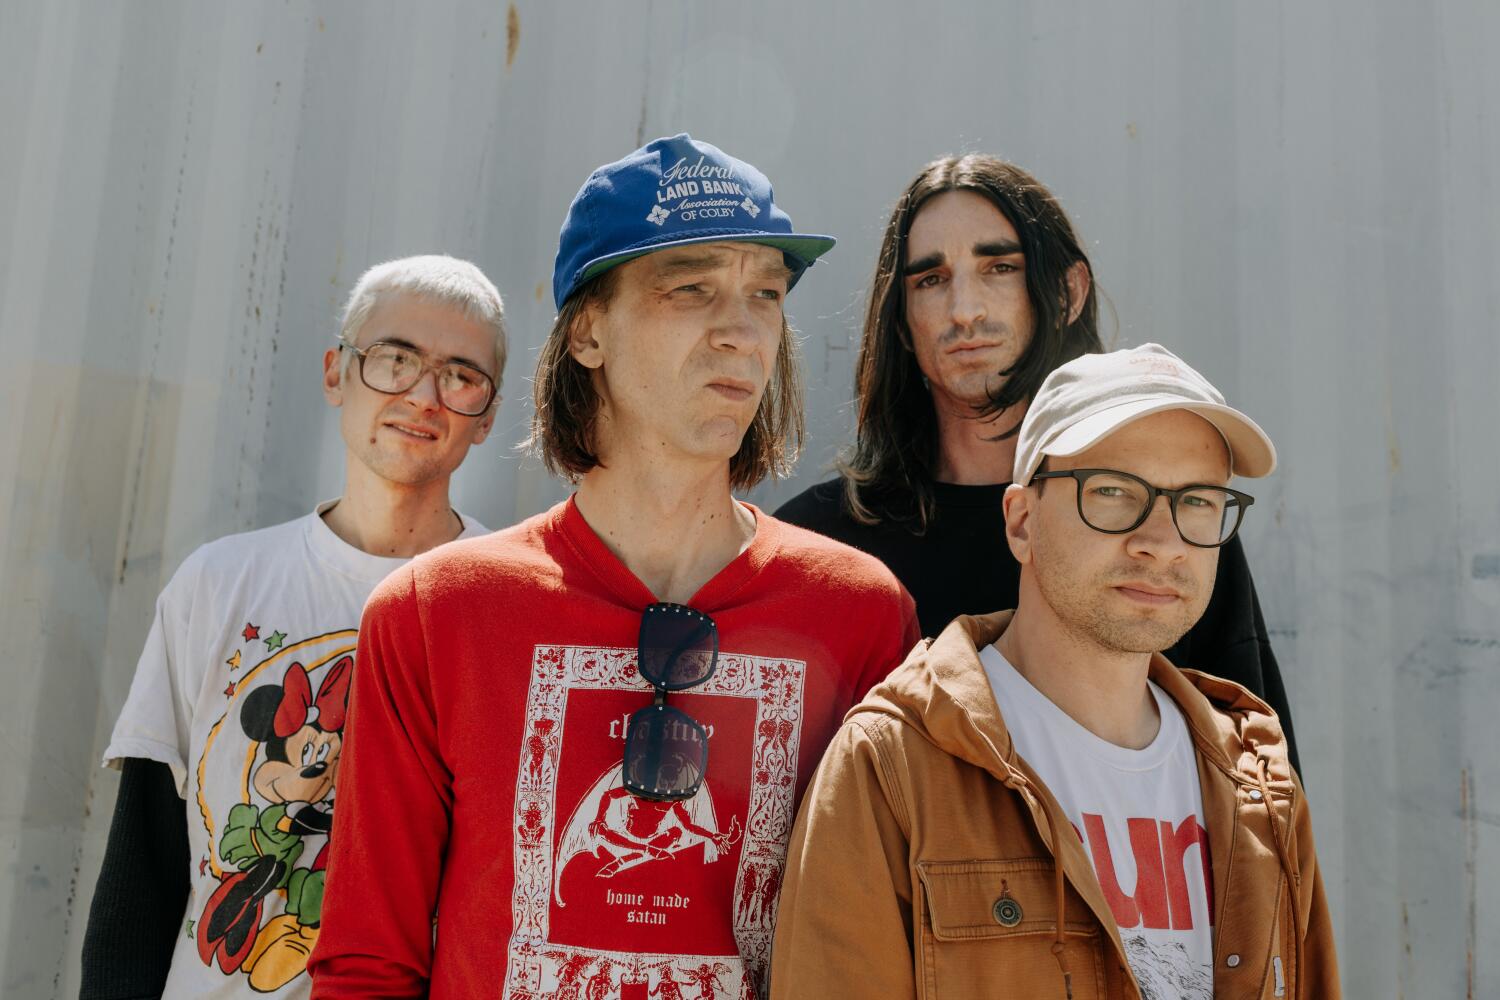 Diiv is a shoegaze band to believe in